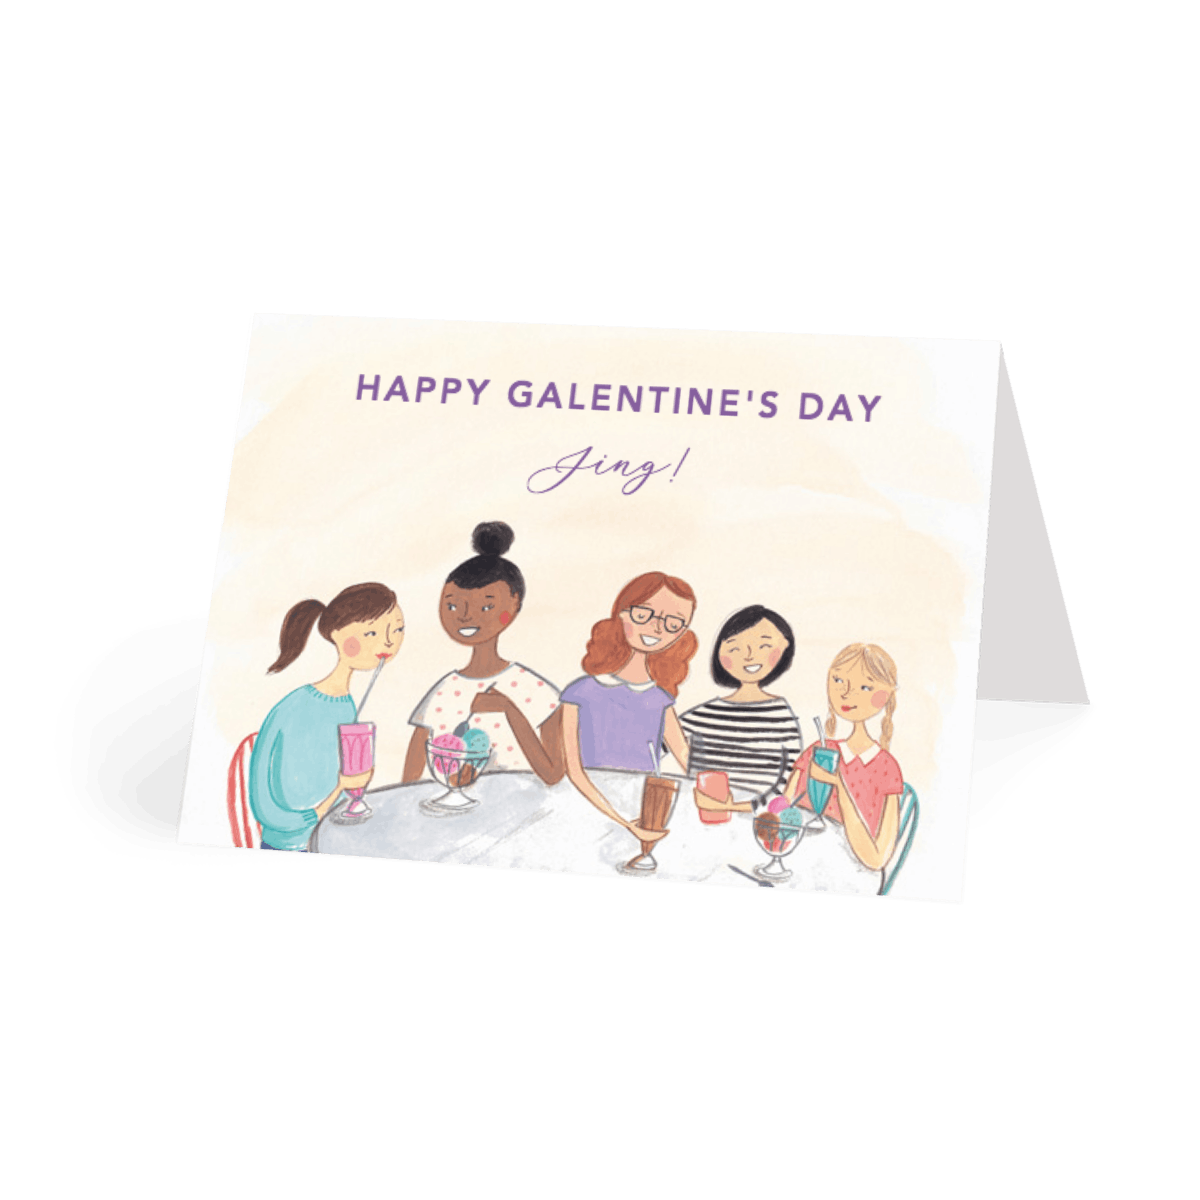 Galentine's Table